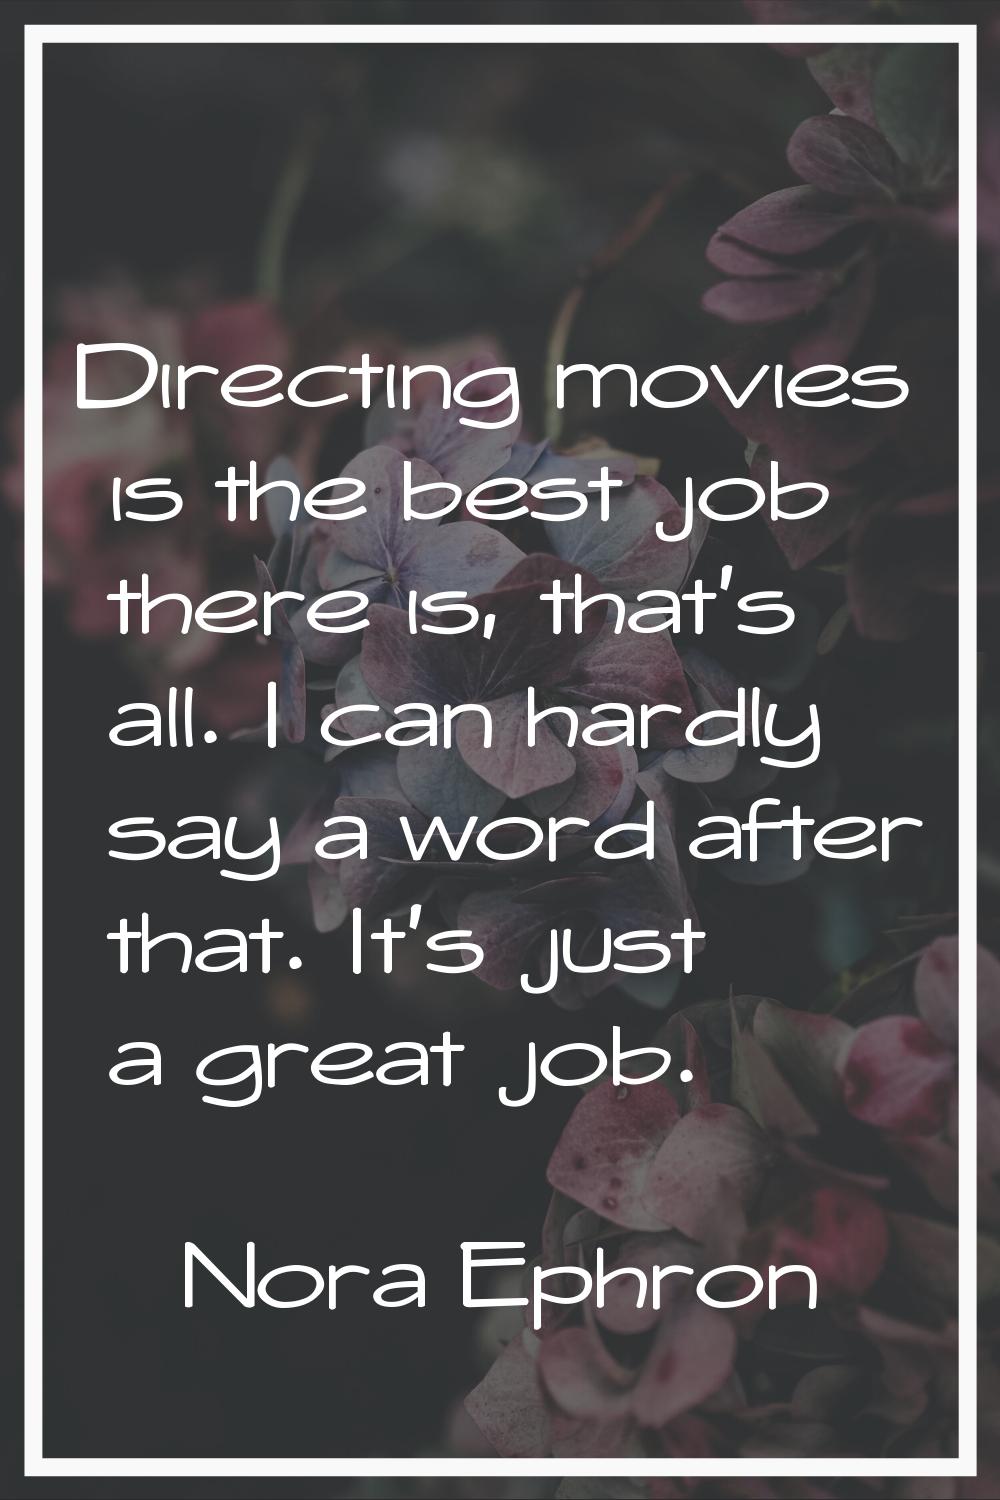 Directing movies is the best job there is, that's all. I can hardly say a word after that. It's jus